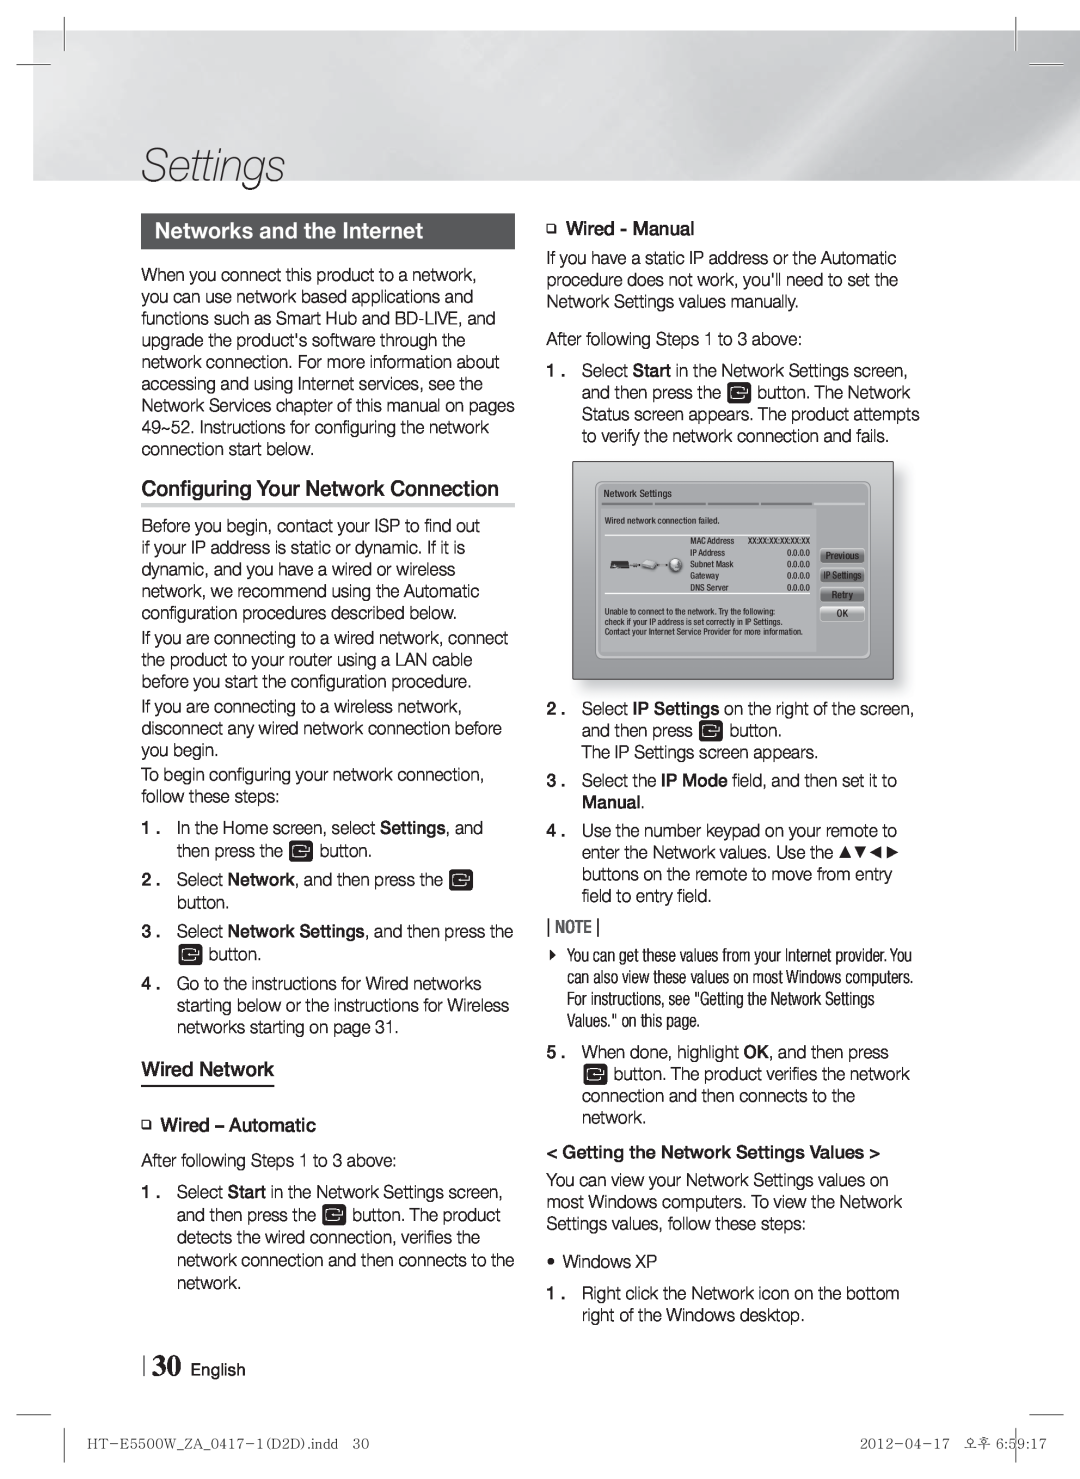 Samsung HT-E550 user manual Networks and the Internet, Settings, Configuring Your Network Connection, Wired Network, Note 